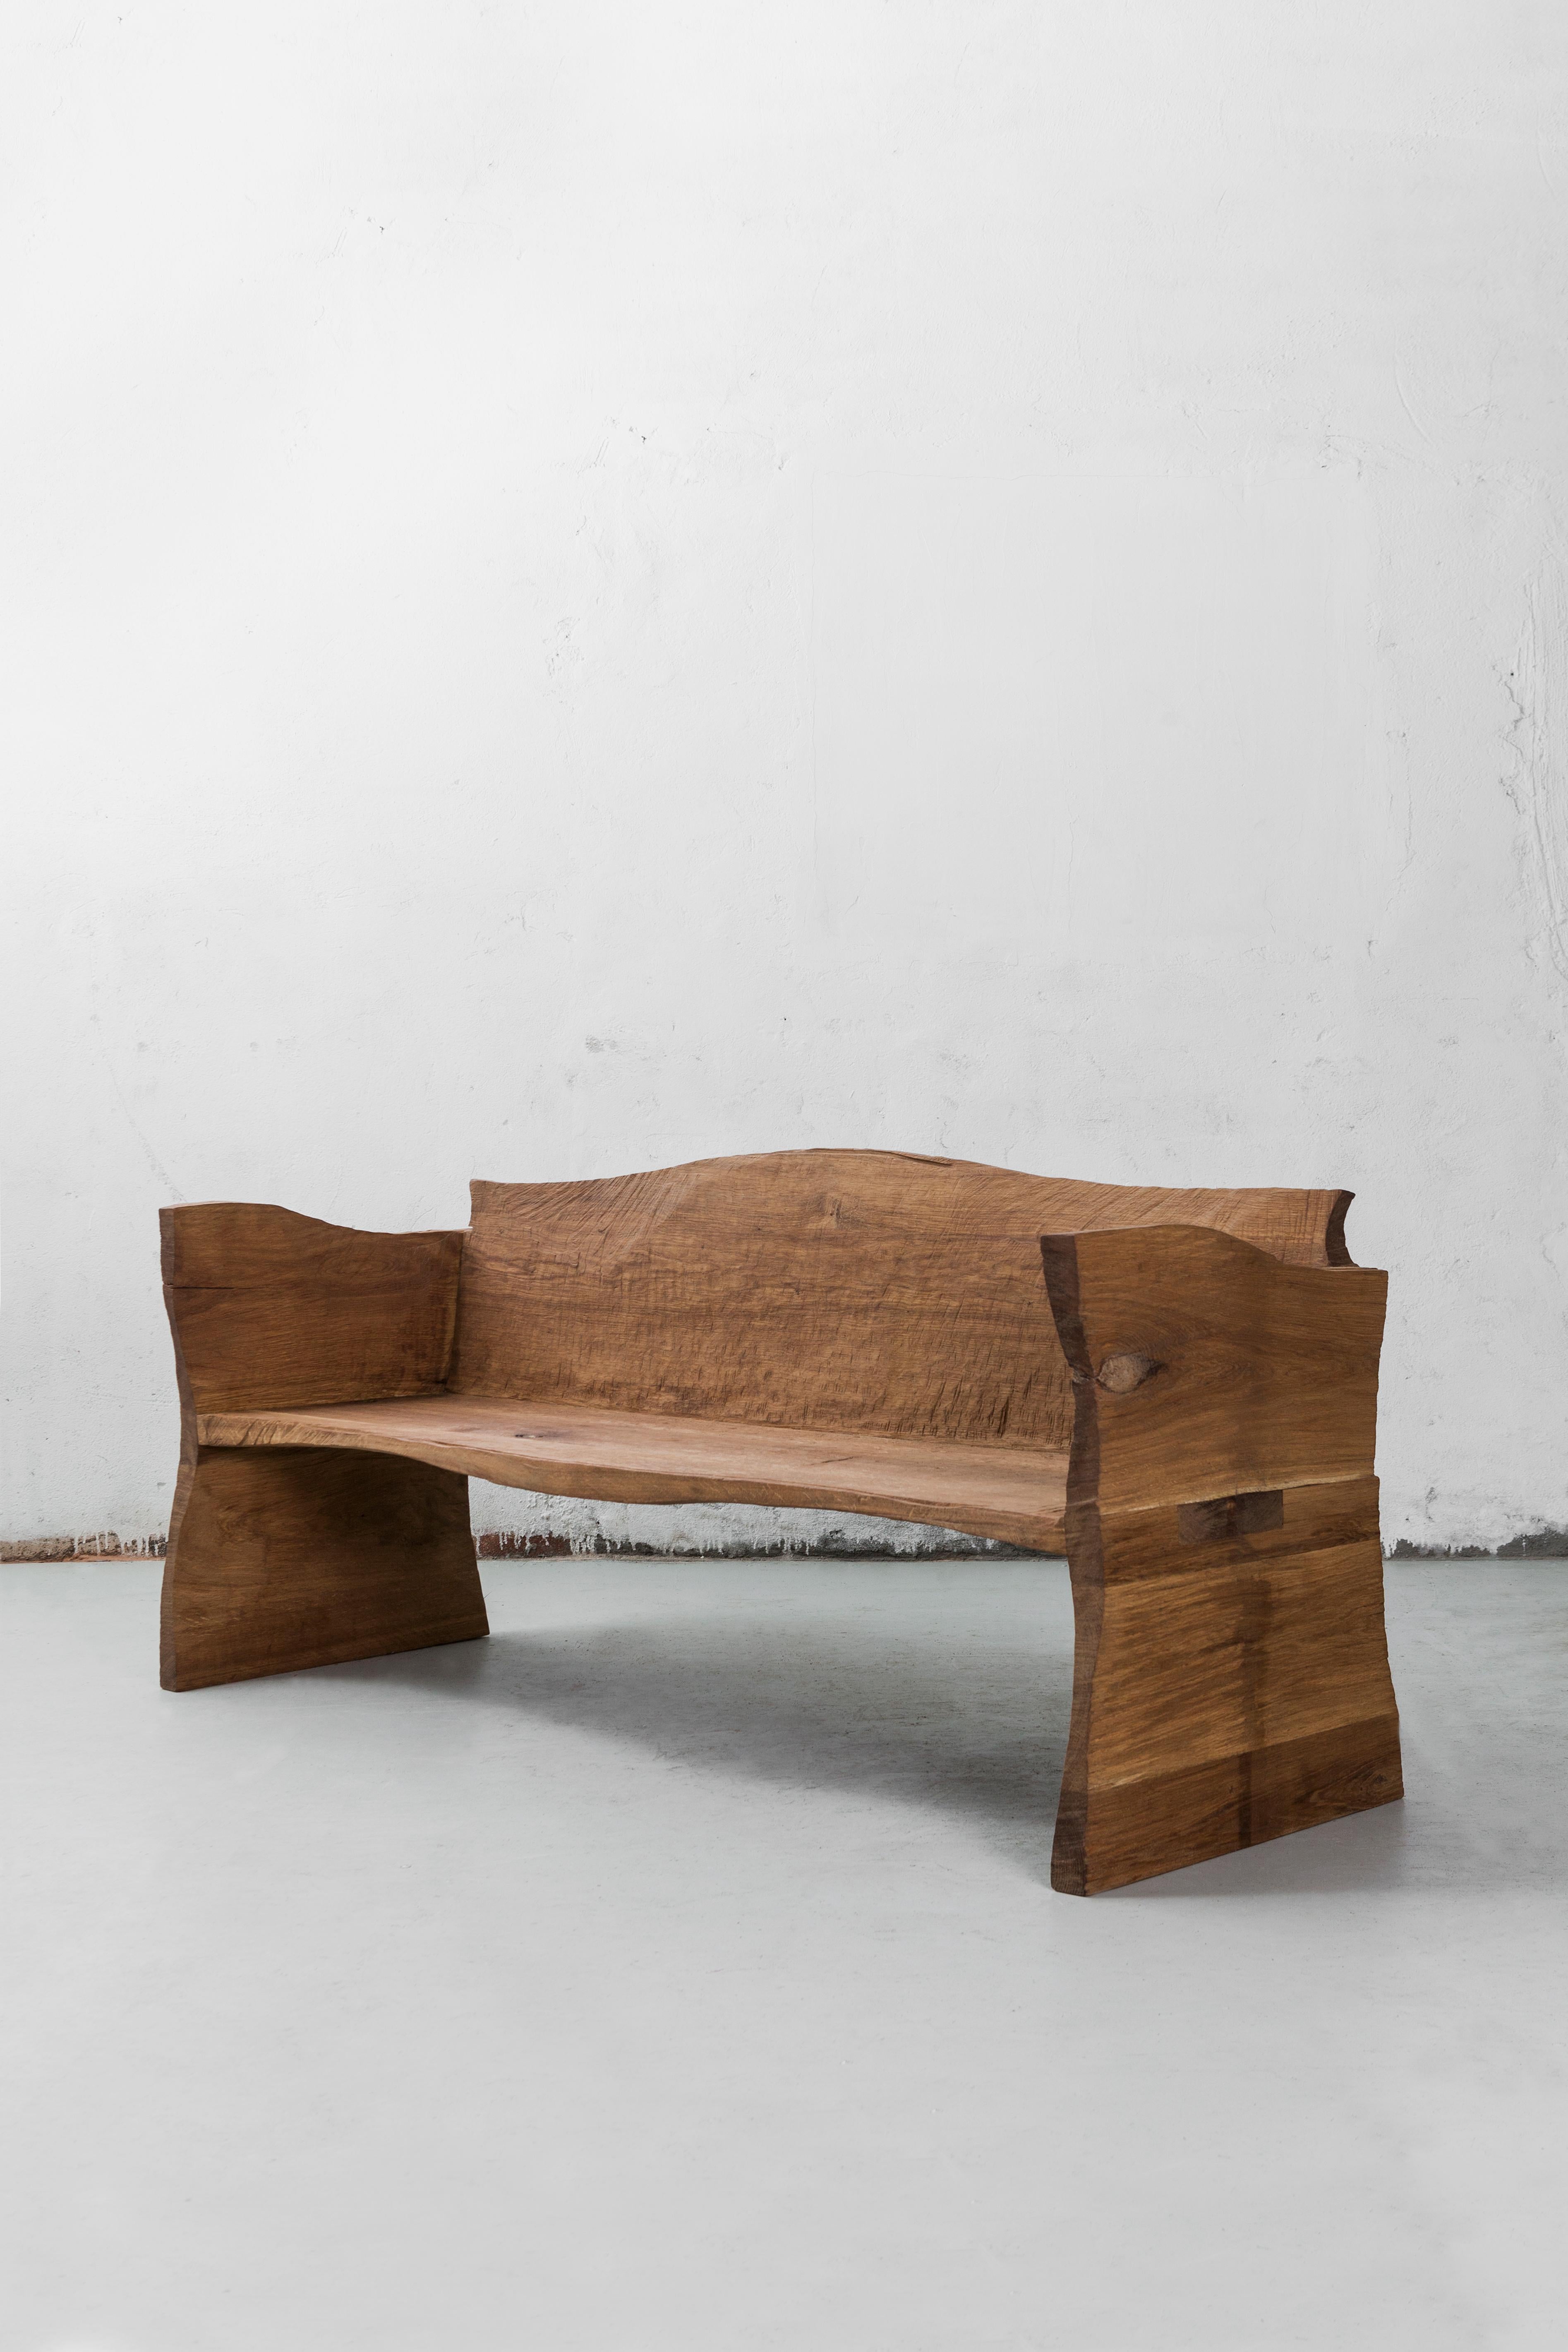 Bench made of solid oak (+ linseed oil)
Measures: 90 x 185 x 60 cm

SÓHA design studio conceives and produces furniture design and decorative objects in solid oak in an authentic style. Inspiration to create all these items comes from the Russian